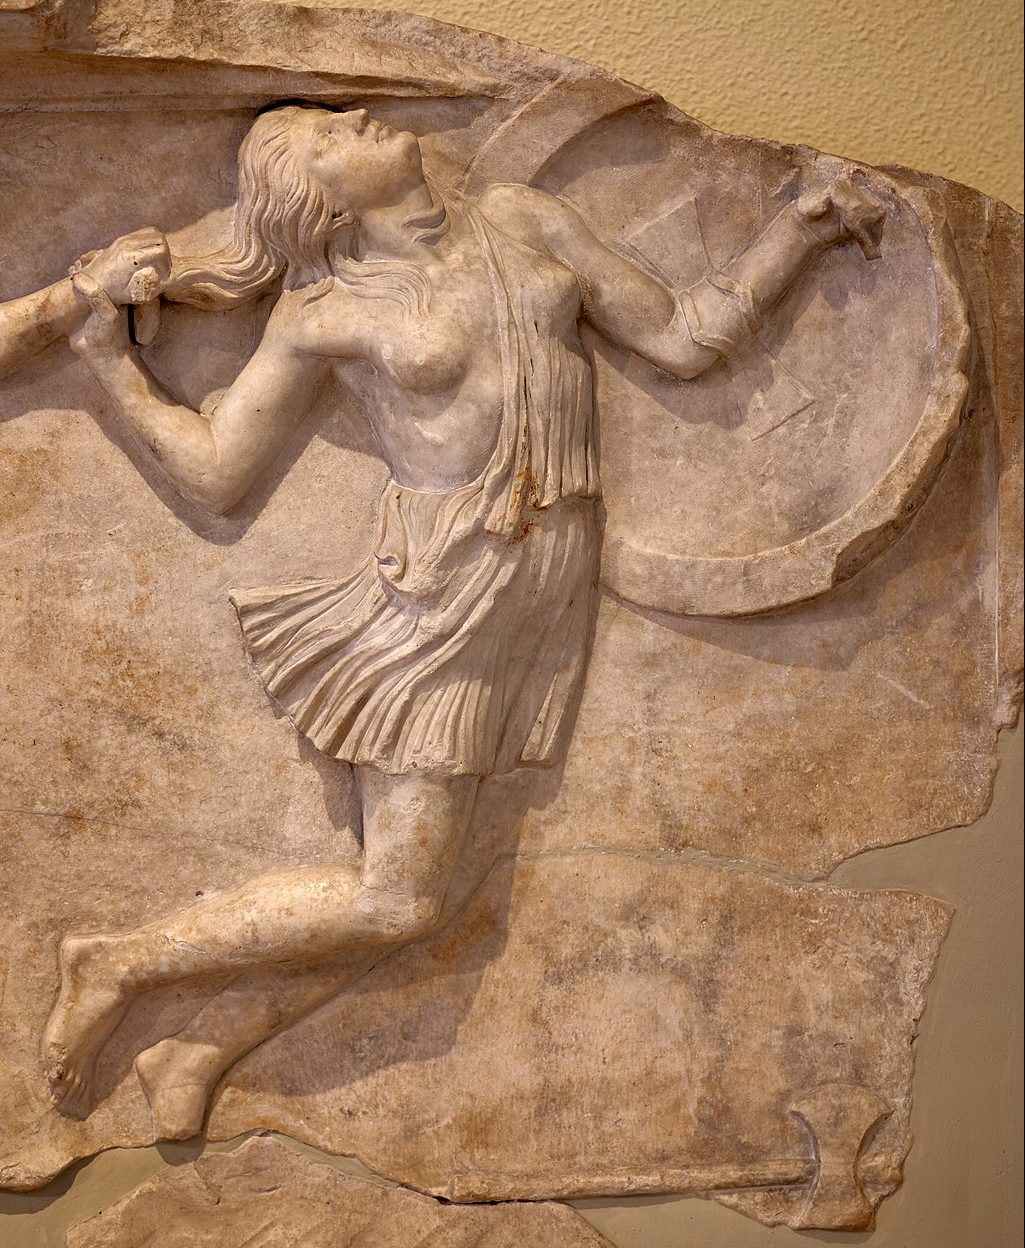 An Amazon, holding a shield an wearing a tunic that leaves one breast bare, stumbles forward, falling as if hit from behind.